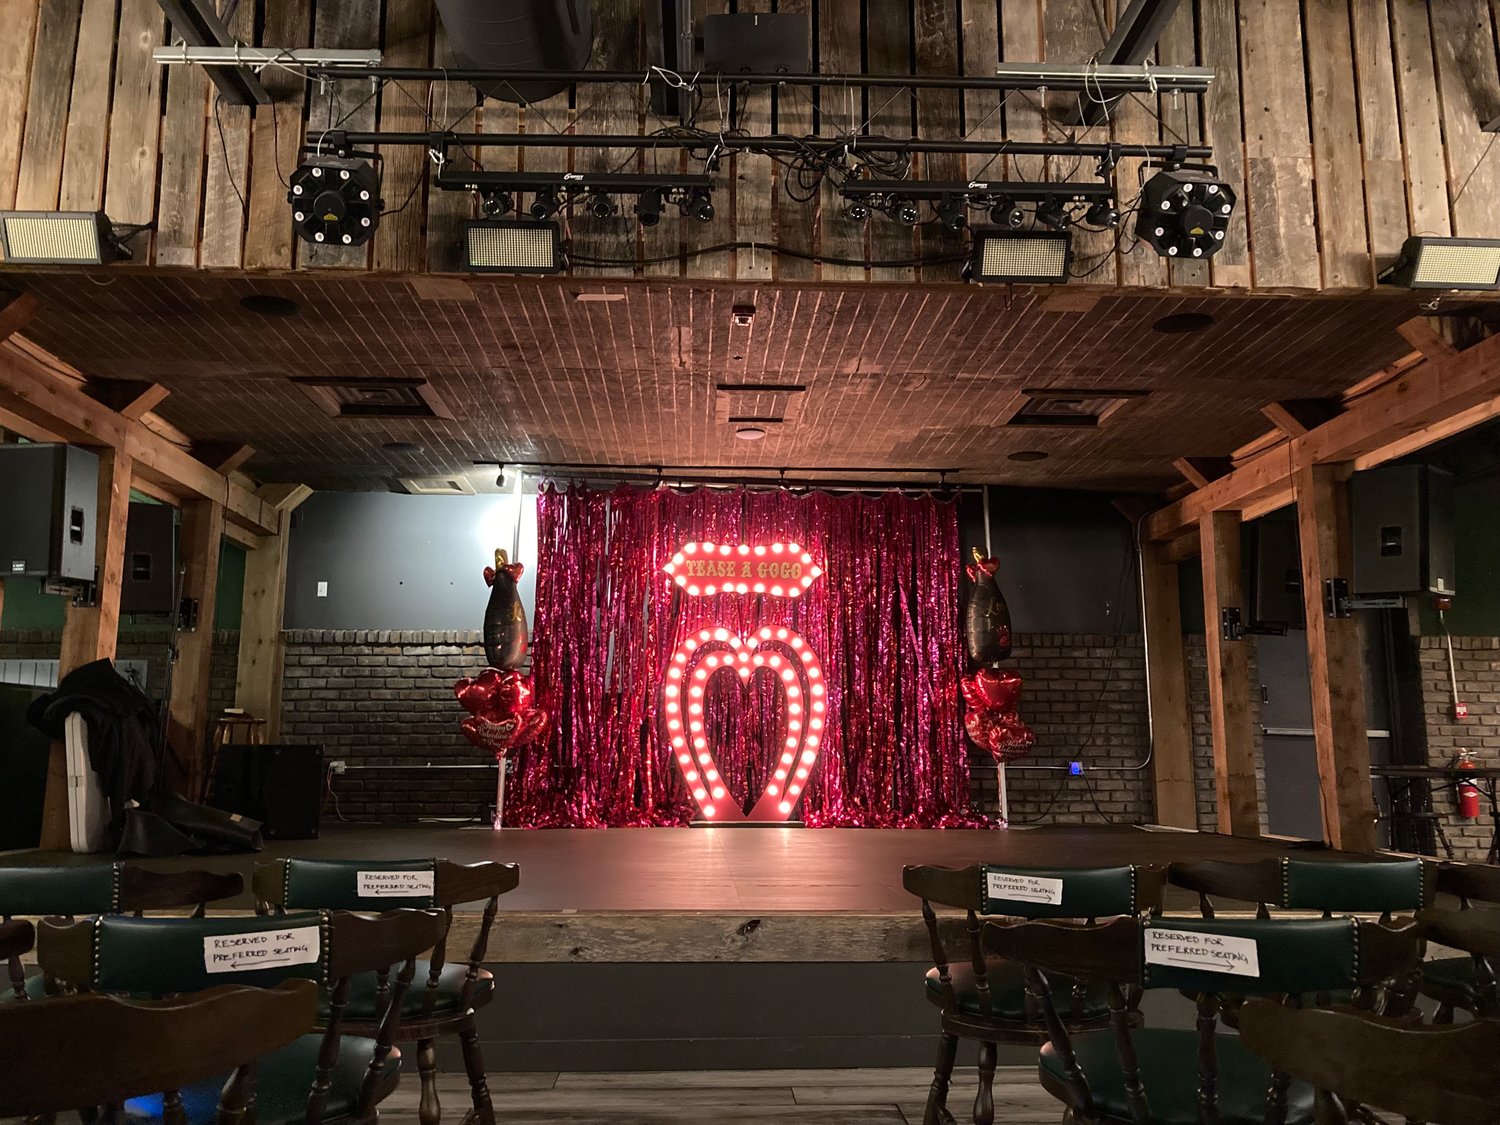 The Junction, offering an eclectic range of events from Country Night to drag performances, hosted Tease A Gogo’s Valentine’s burlesque show on Saturday (Feb. 11).